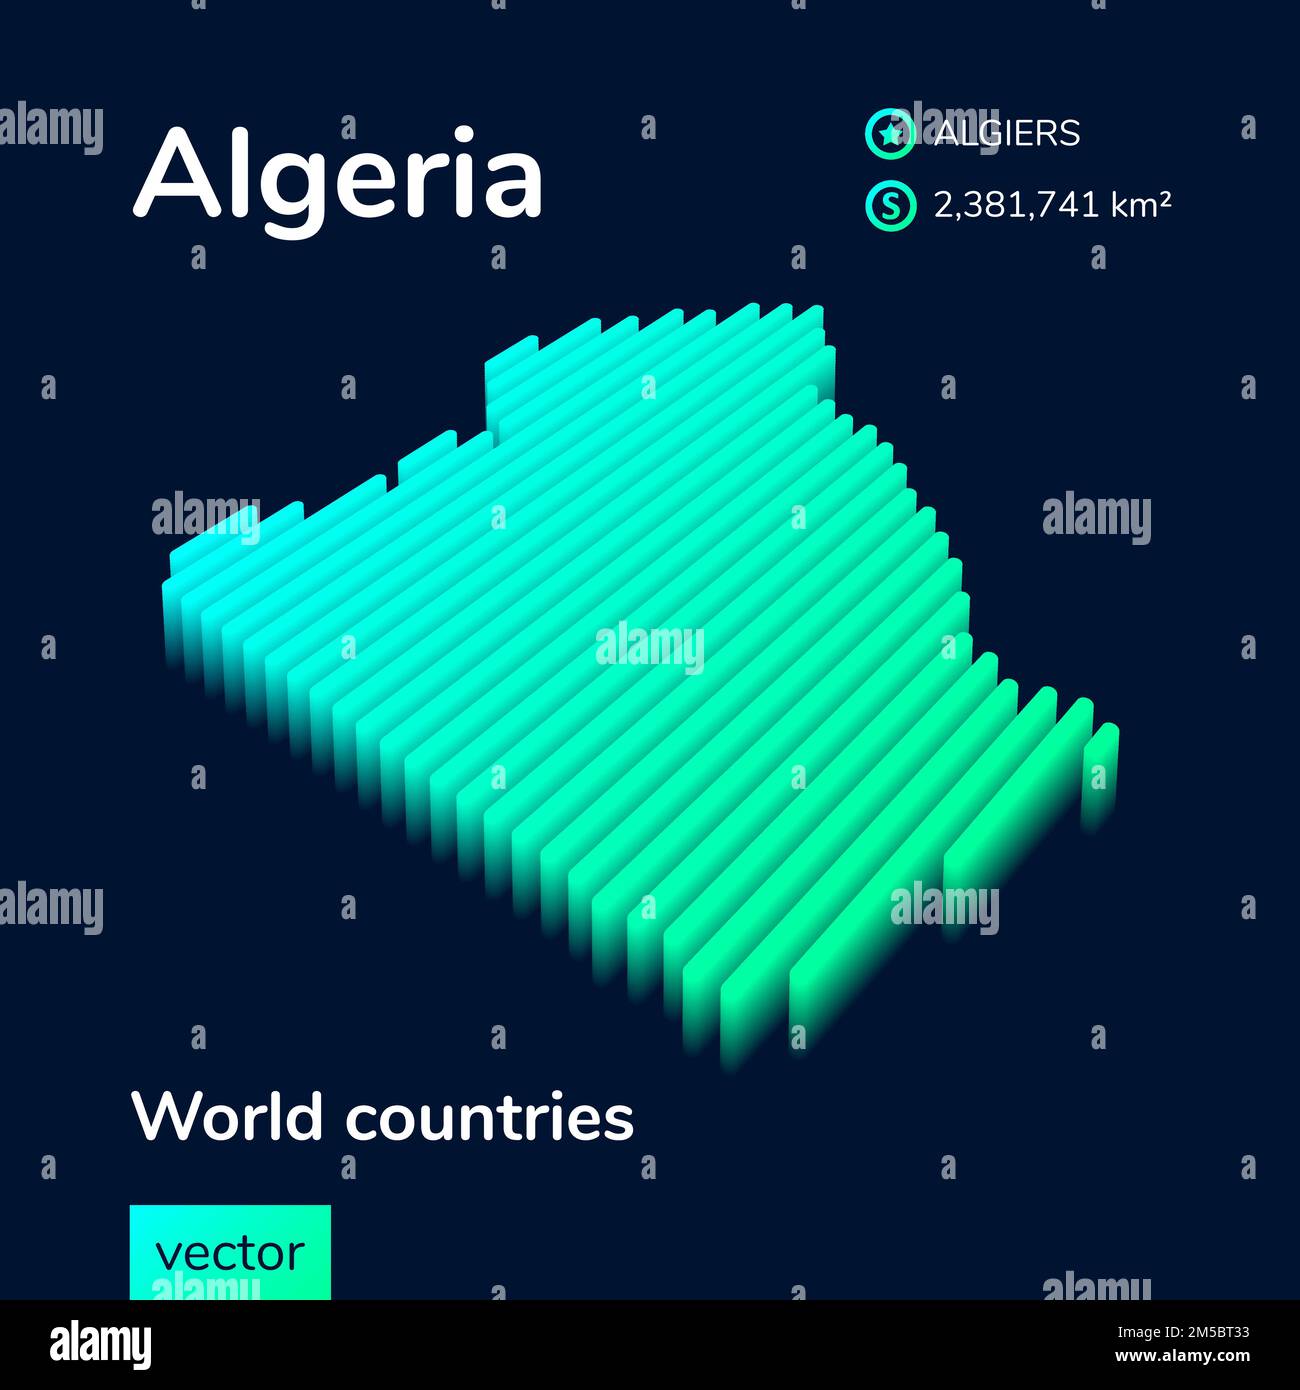 Stylized neon digital isometric striped vector Algeria map with 3d effect. Map of Algeria is in green and mint colors on the dark blue background Stock Vector